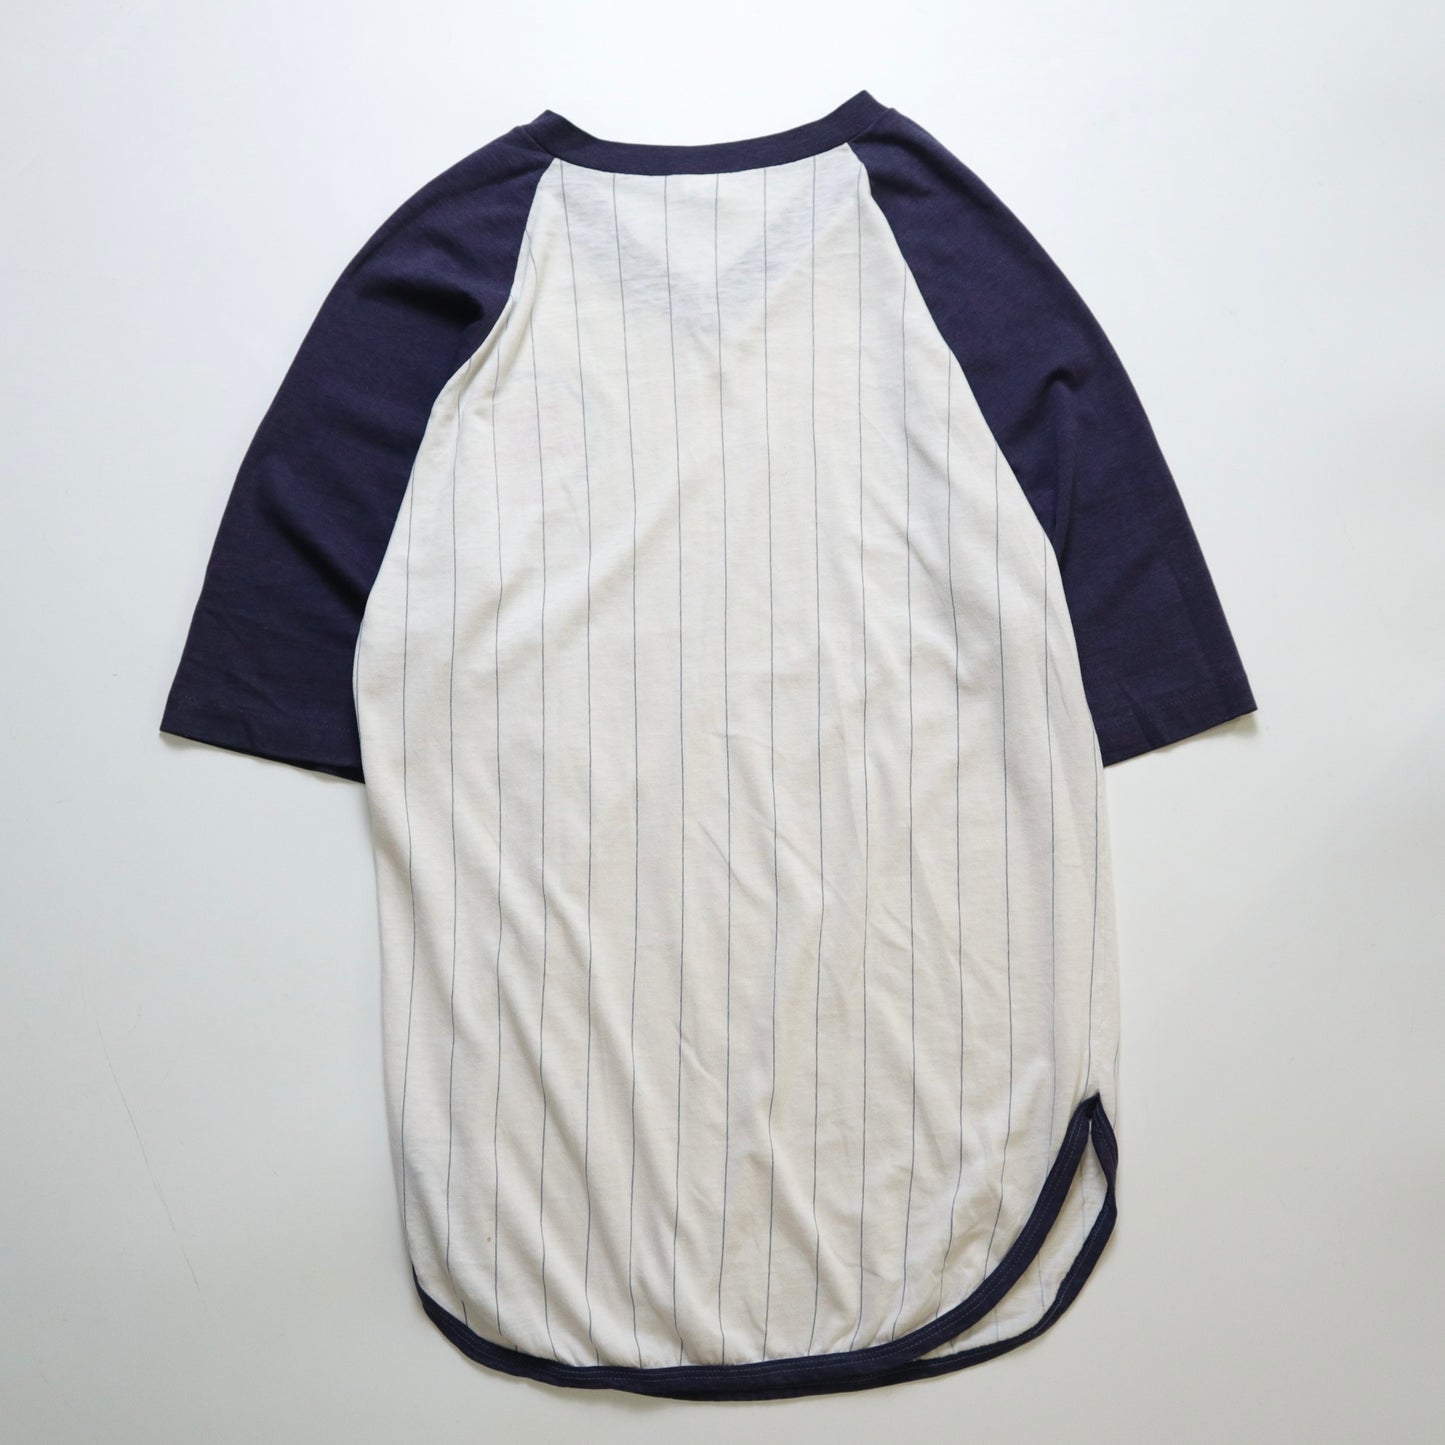 1980s American-made Champion Champ of Champs quarter-sleeve baseball top